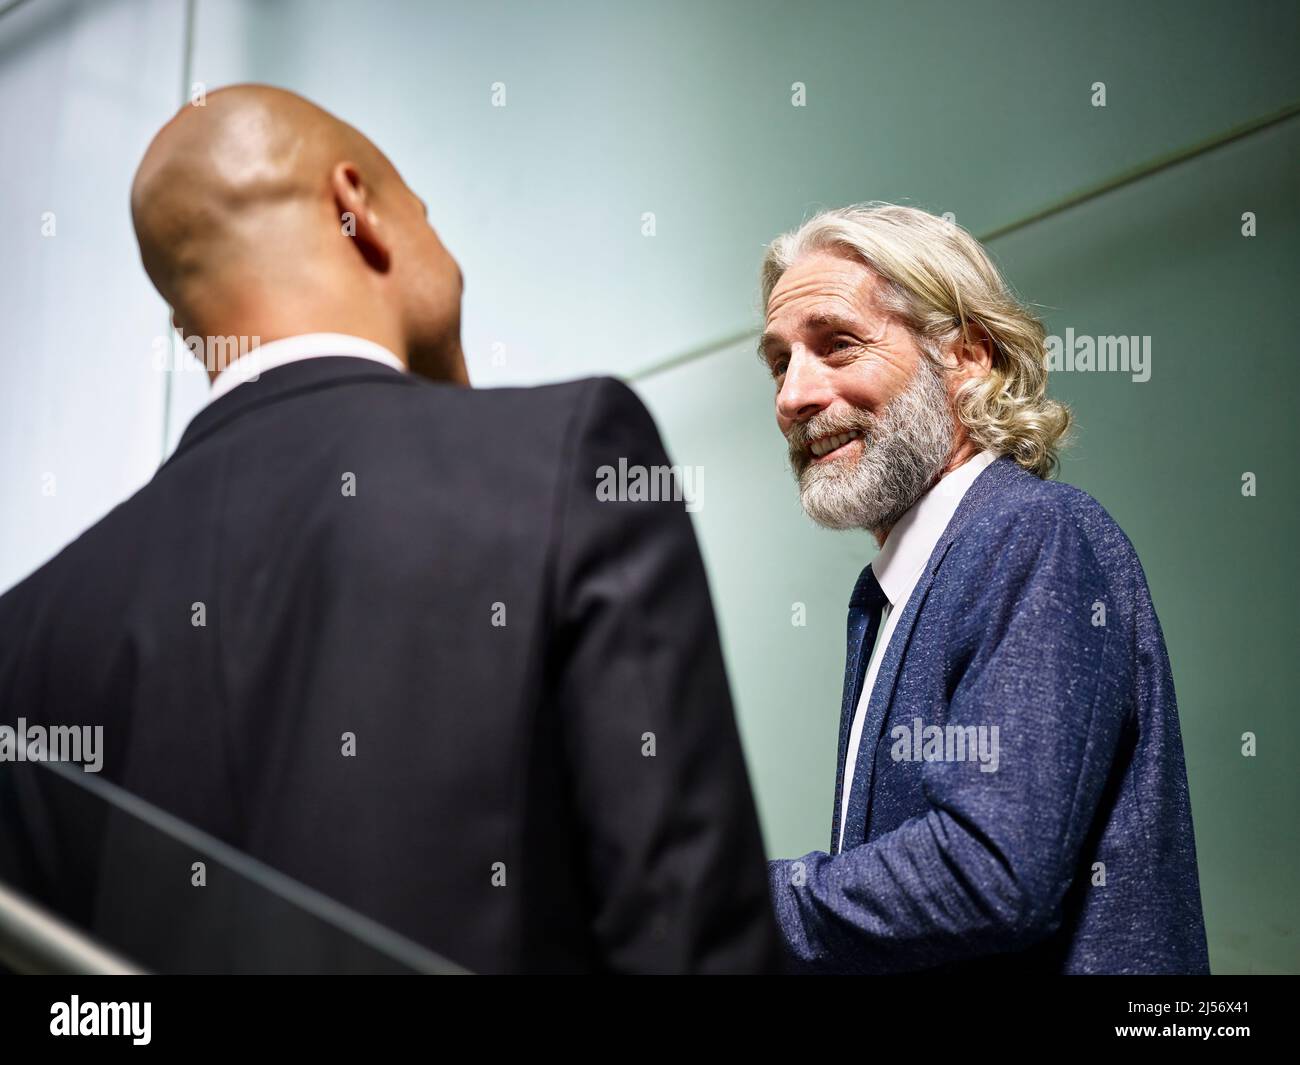 caucasian and latino corporate business men talking chatting having a conversation while walking on stairs in modern office building Stock Photo